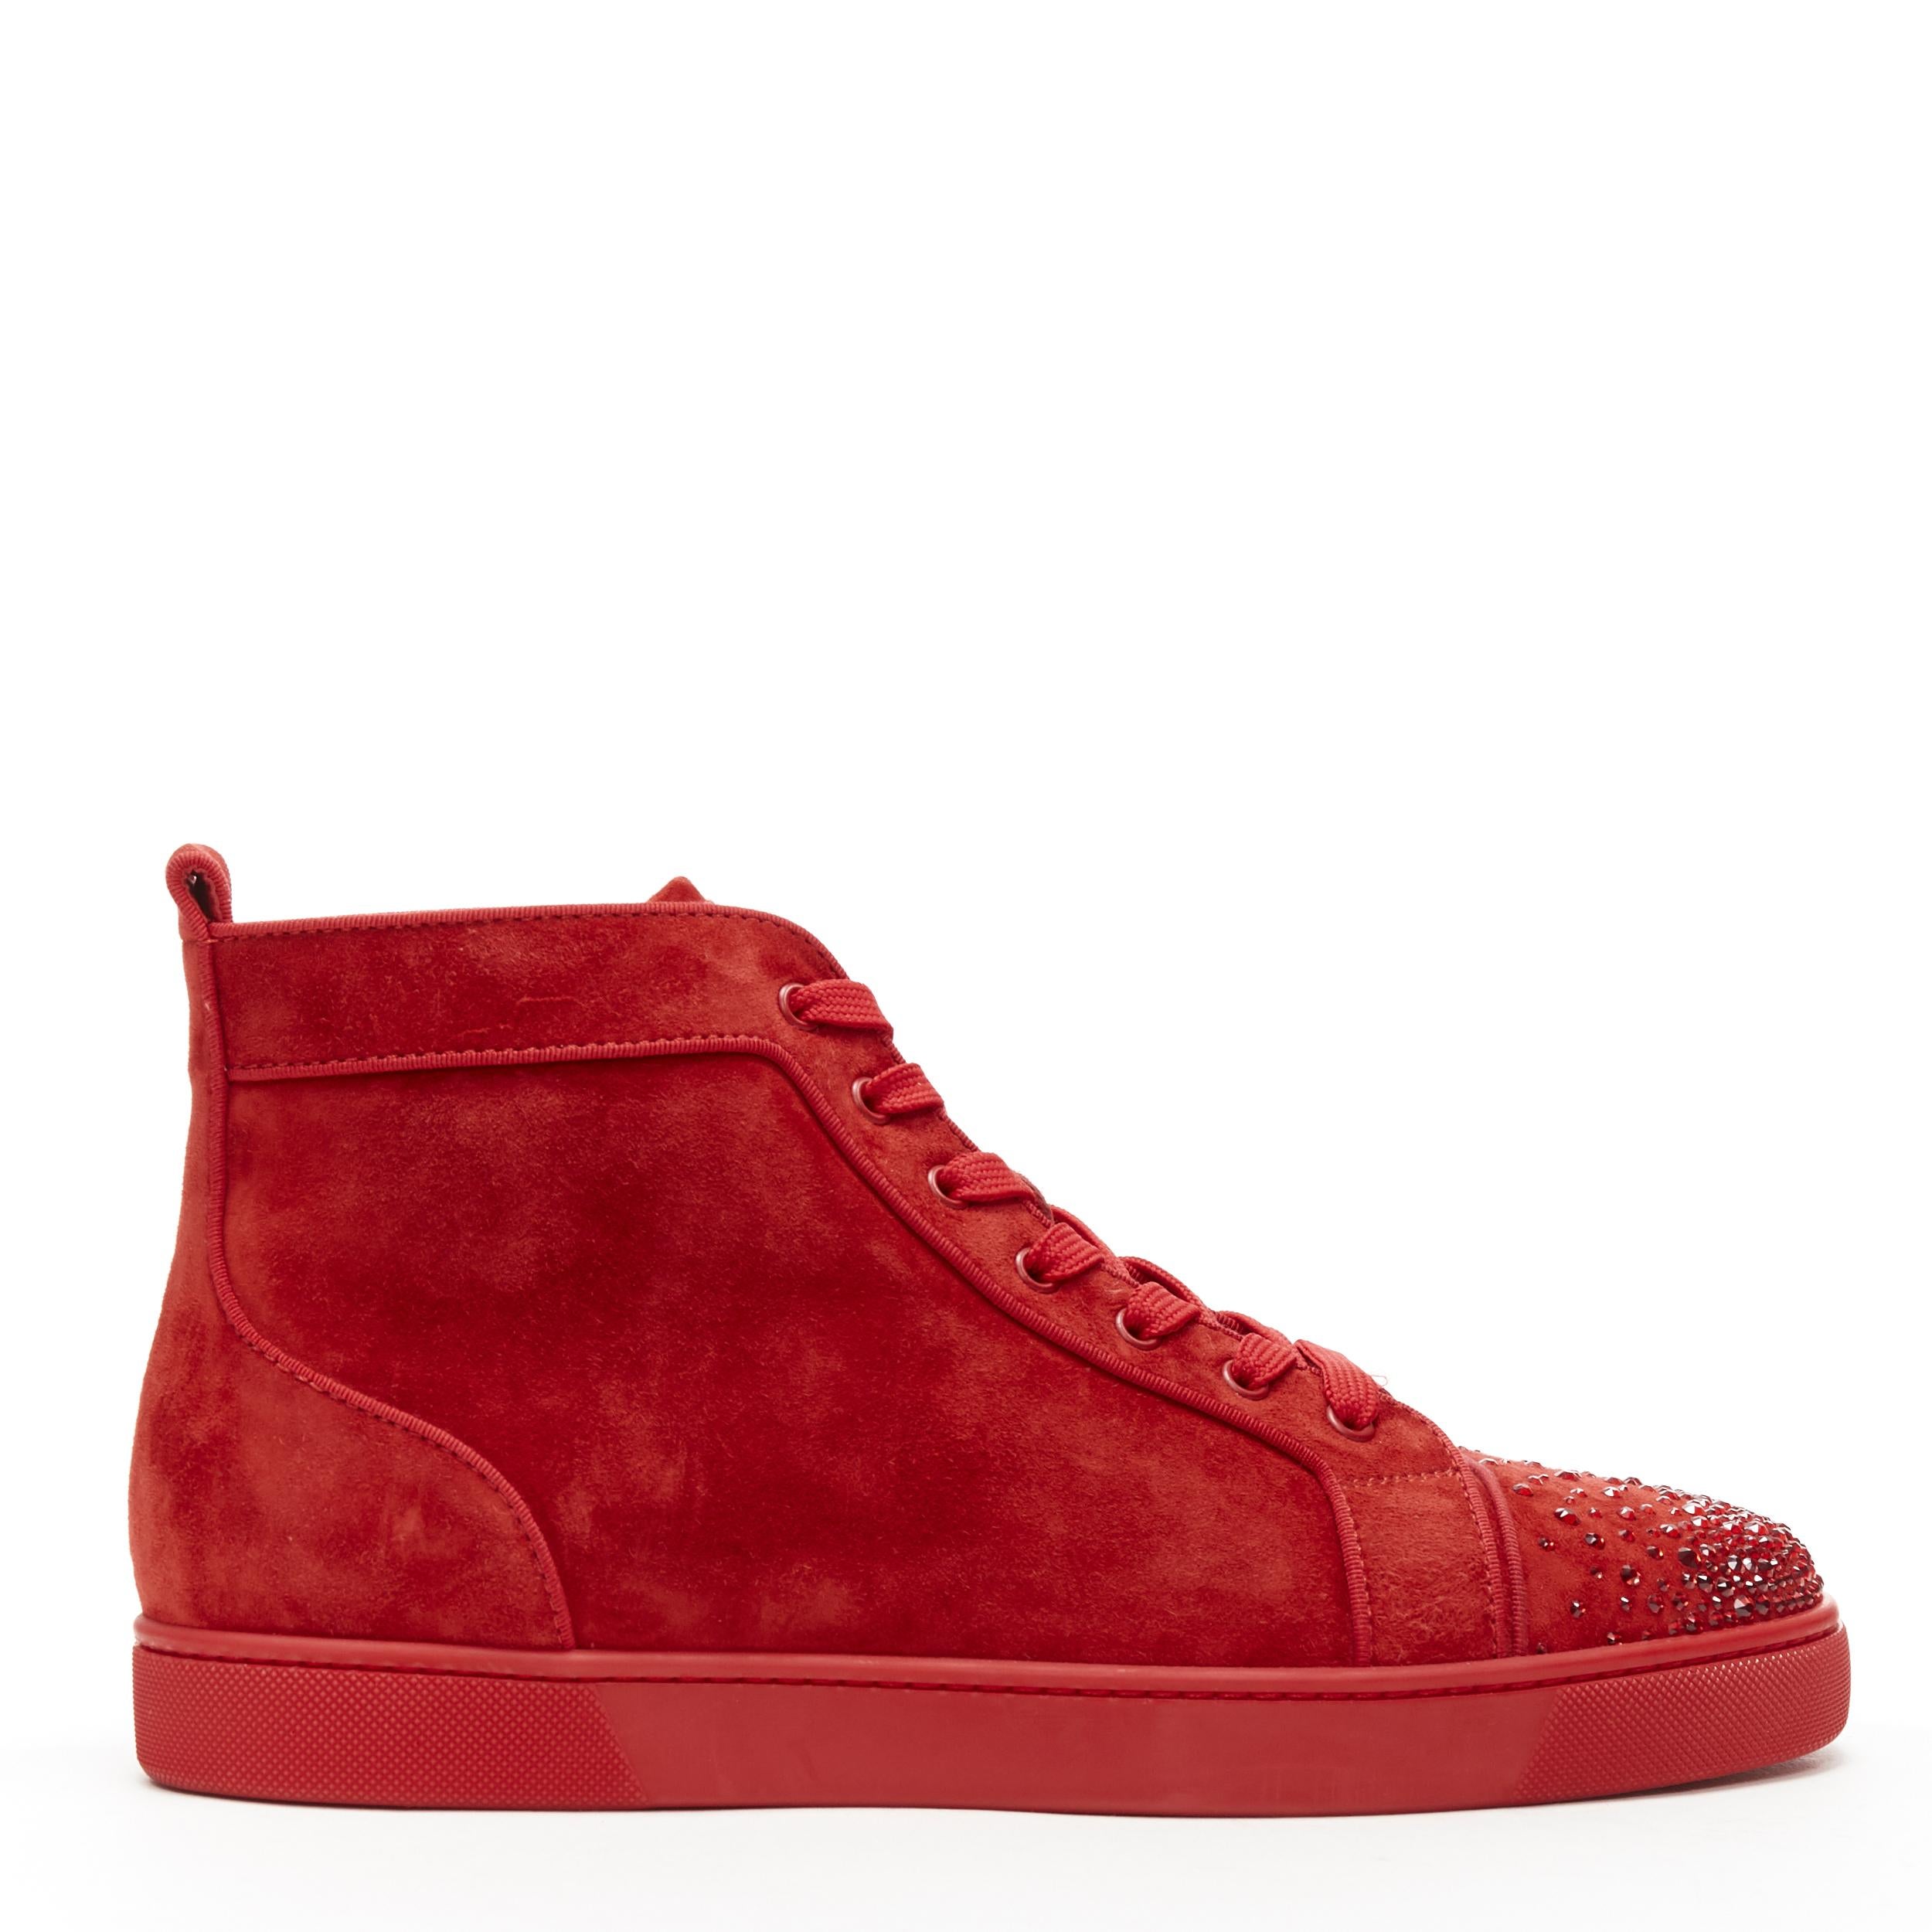 new CHRISTIAN LOUBOUTIN Lou New Degra Rougissime red strass toe sneakers EU45
Brand: Christian Louboutin
Designer: Christian Louboutin
Model Name / Style: Lou New Degra
Material: Suede
Color: Red
Pattern: Solid
Closure: Lace up
Extra Detail: Style